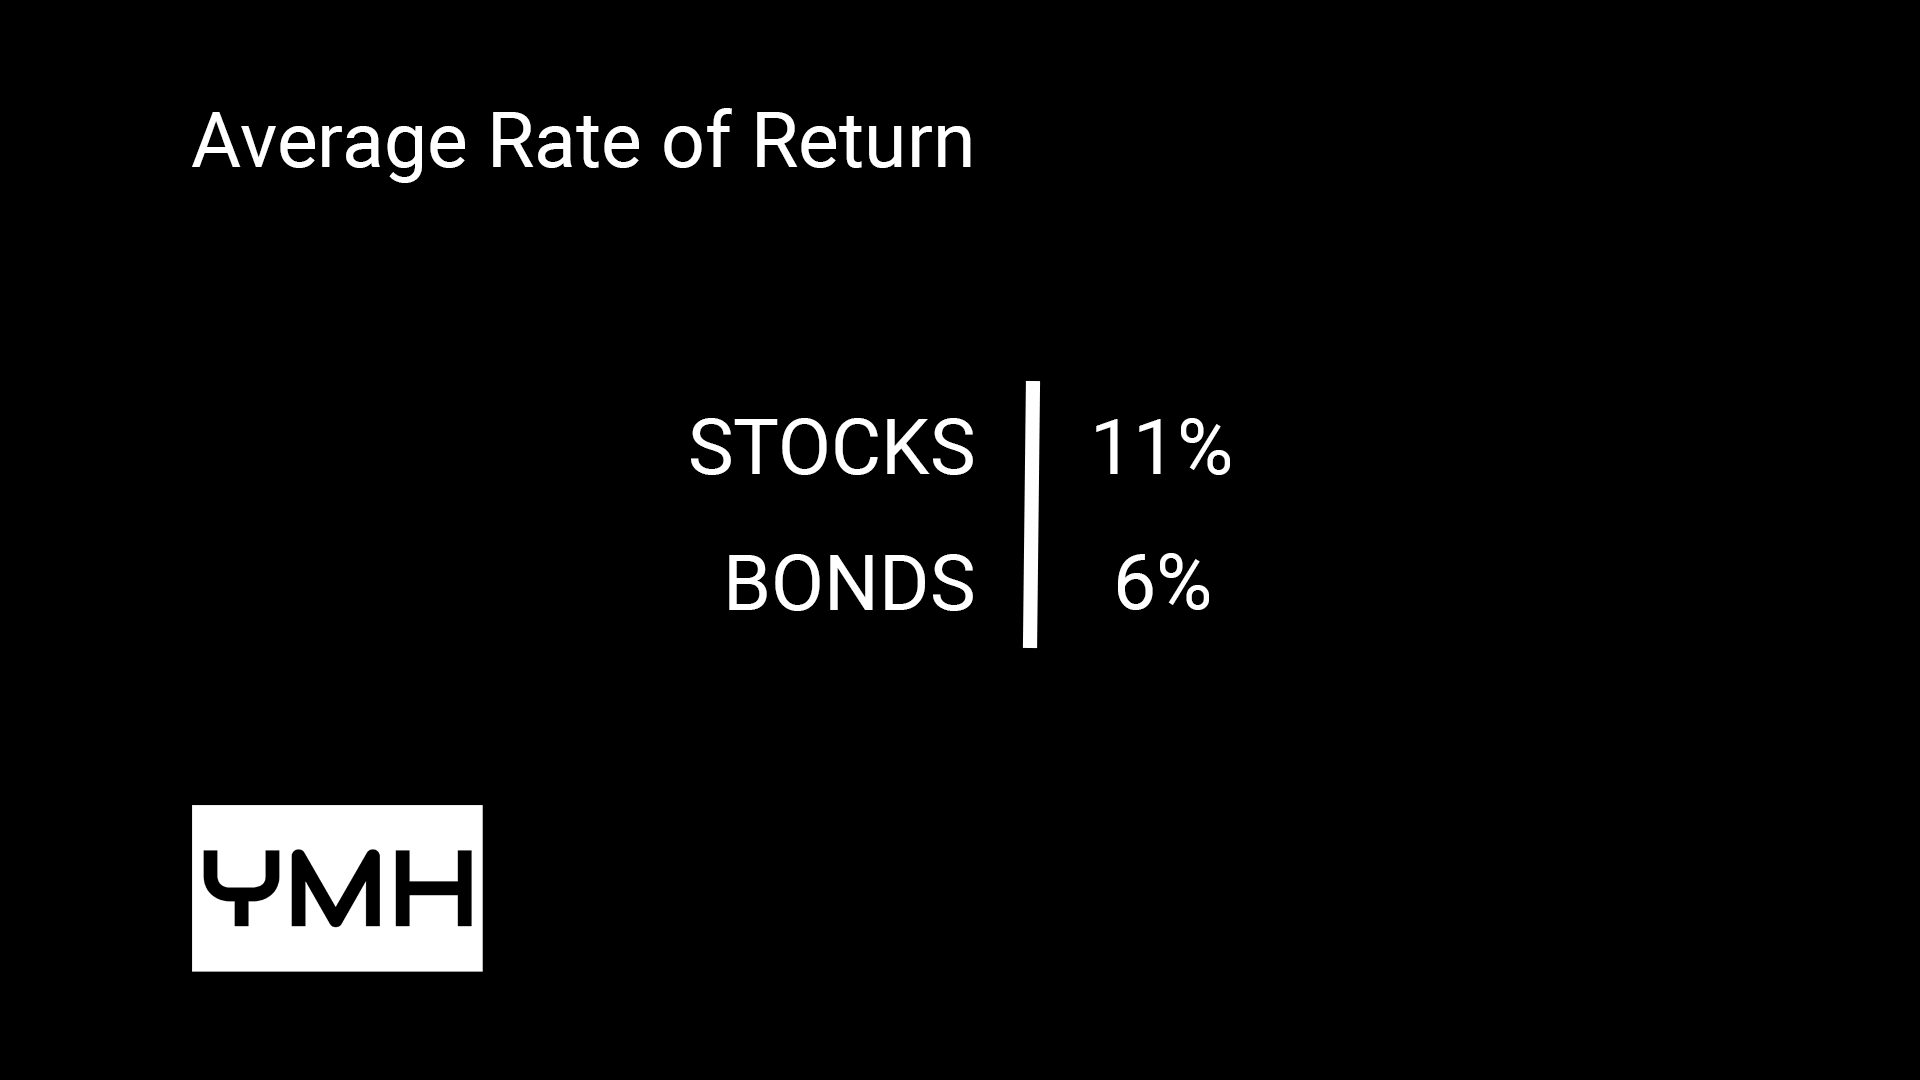 A chart showing the average rate of return assumed for stocks at 11% and bonds at 6%.